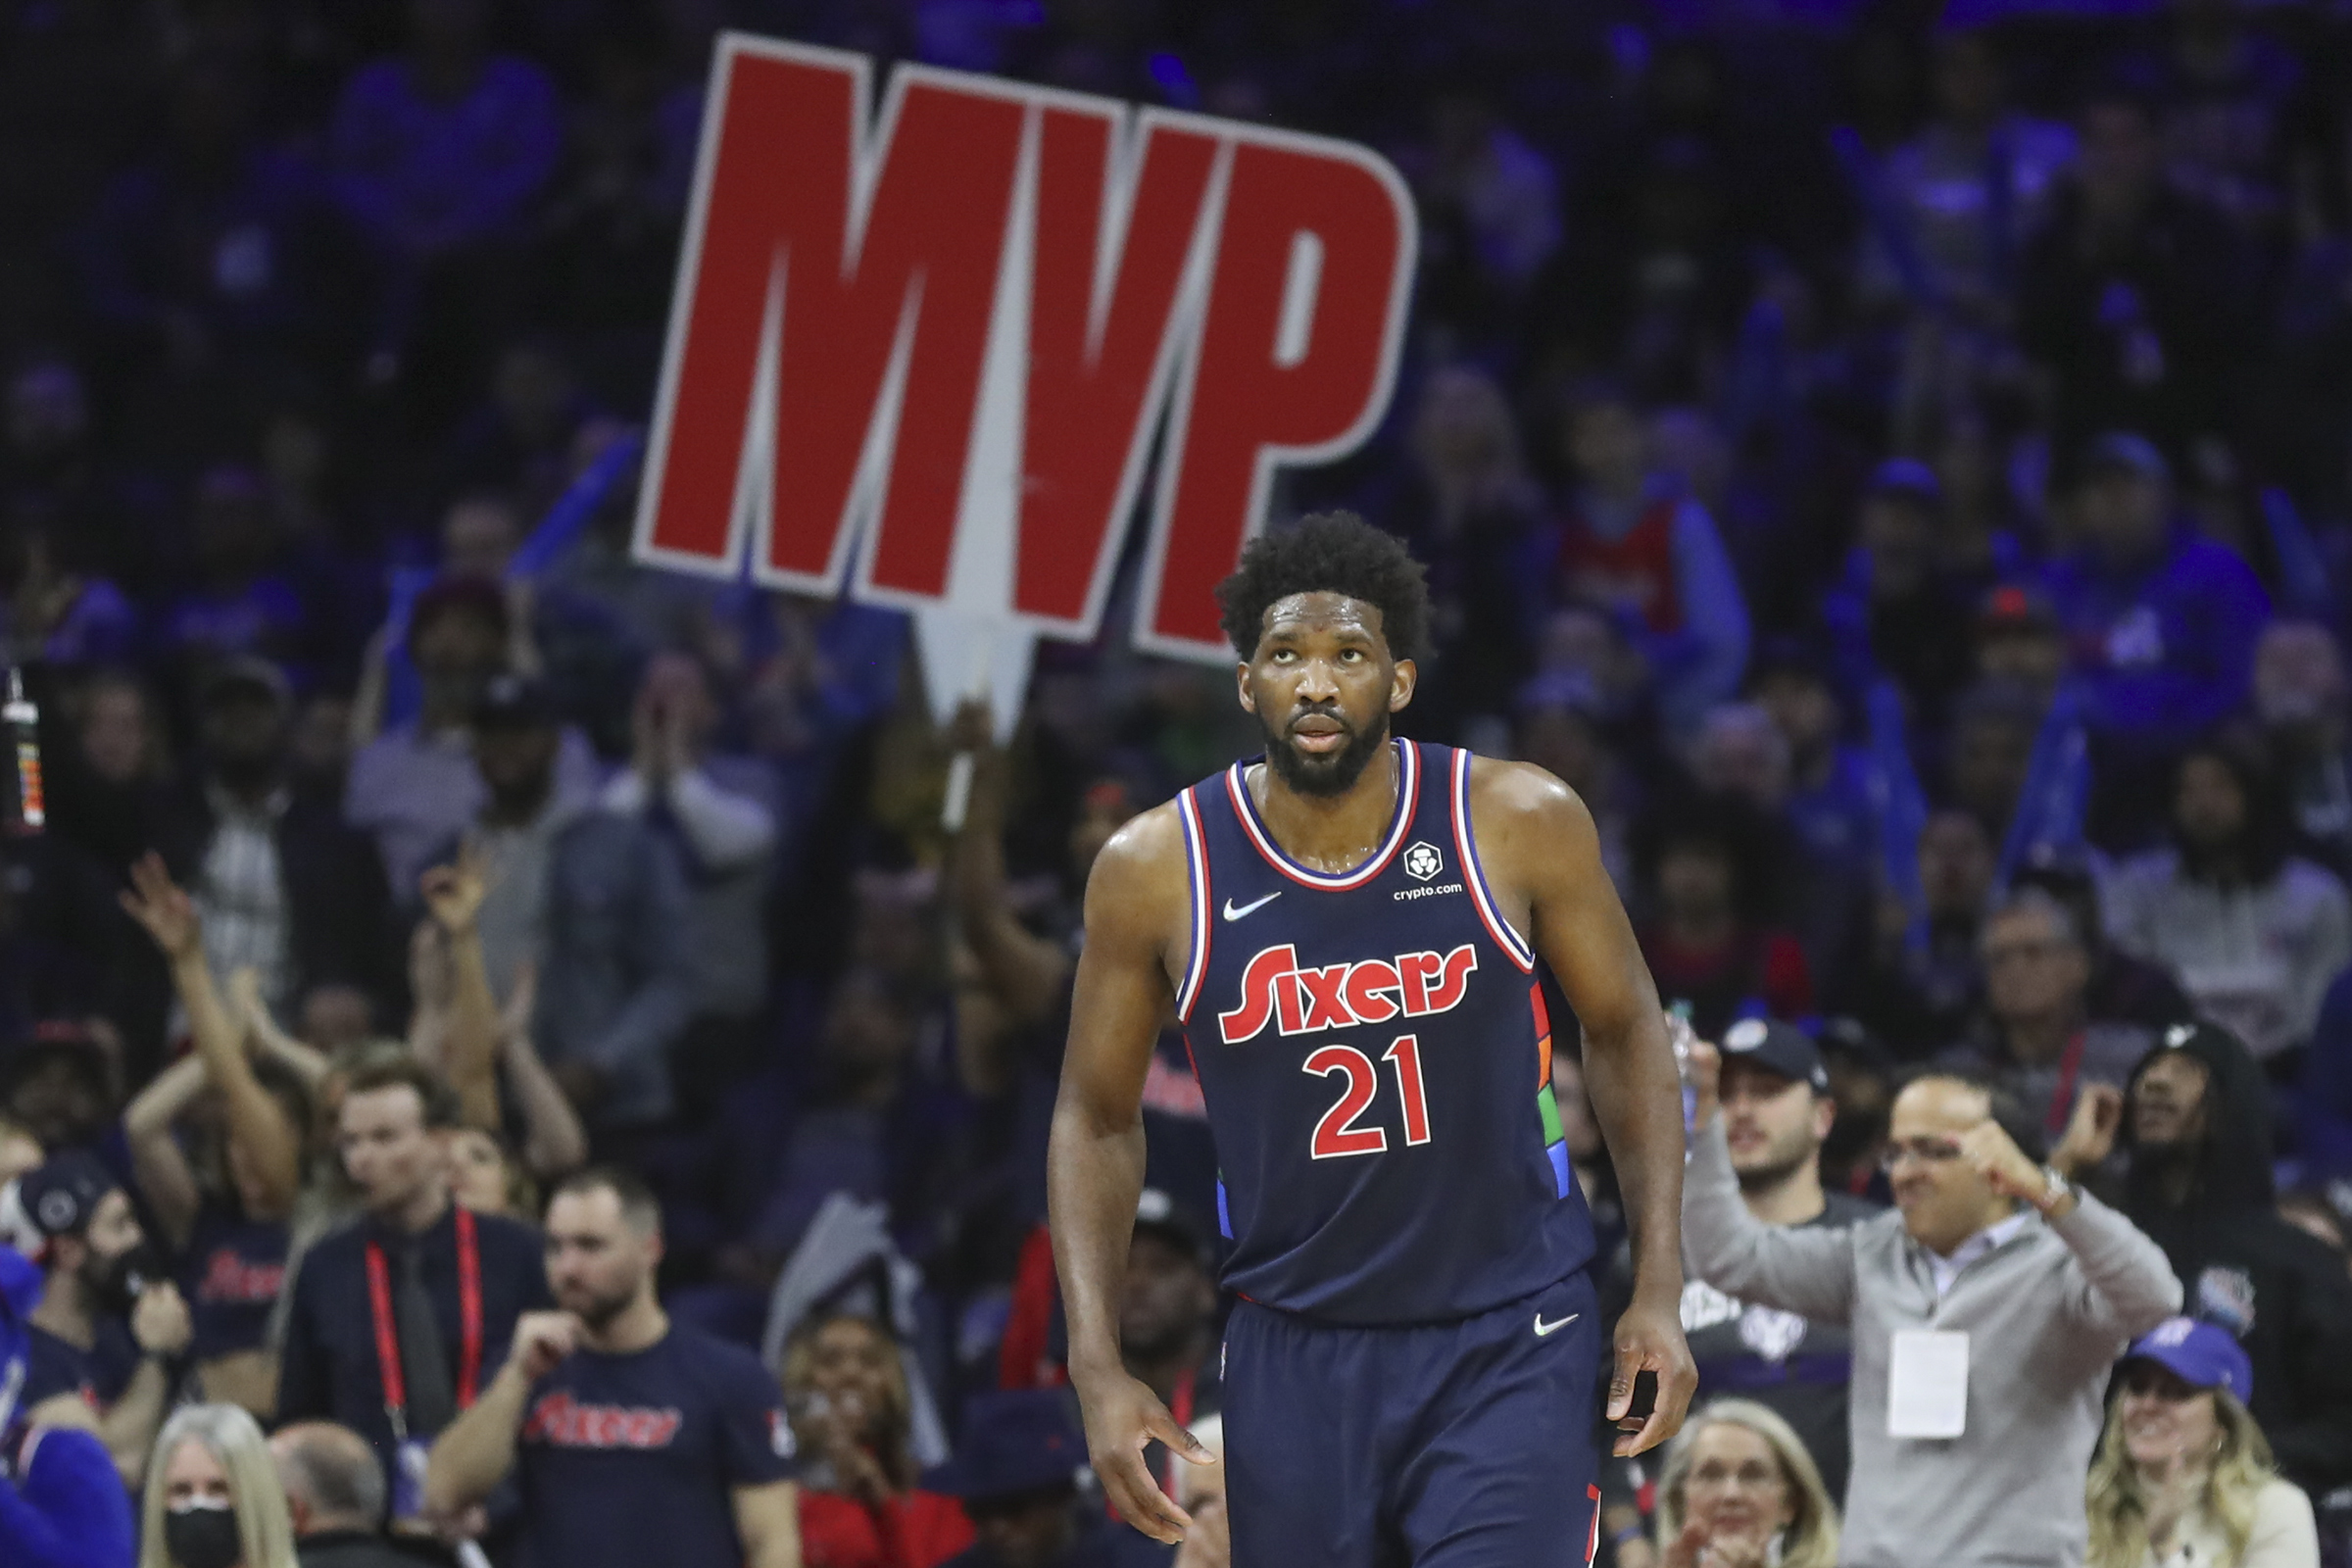 It's official - Joel Embiid is the MVP! TRUST THE PROCESS